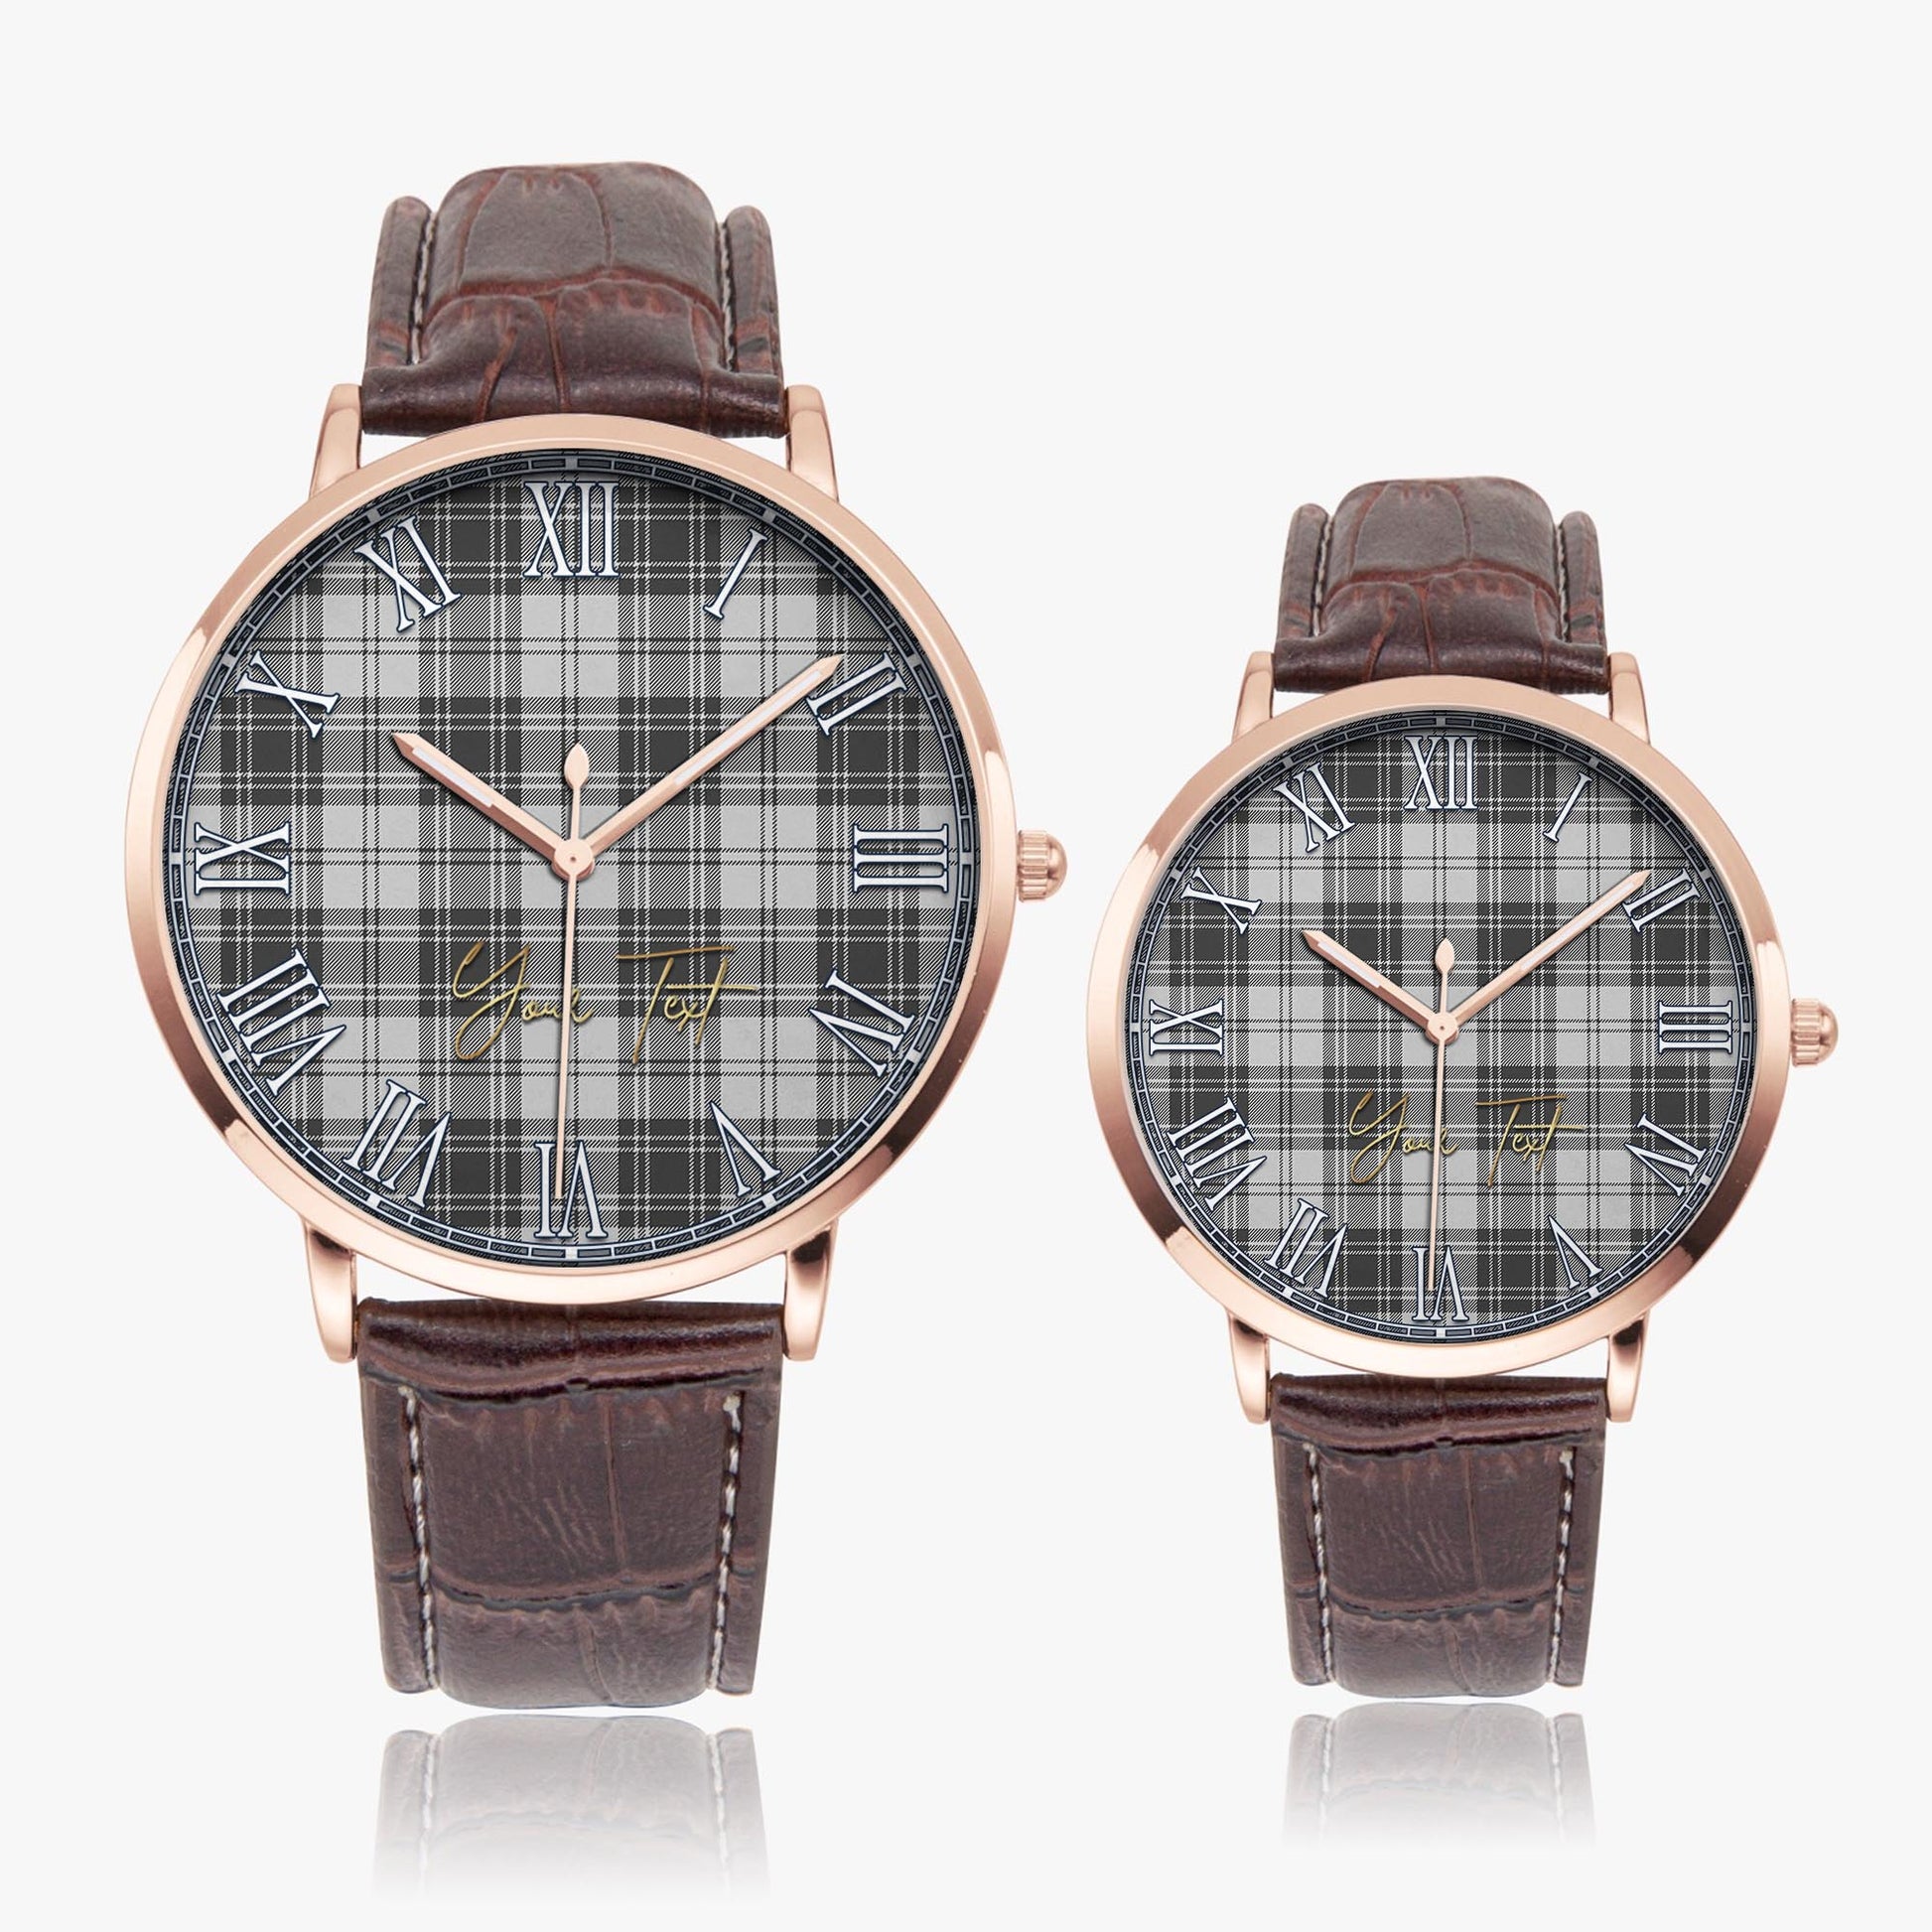 Glen Tartan Personalized Your Text Leather Trap Quartz Watch Ultra Thin Rose Gold Case With Brown Leather Strap - Tartanvibesclothing